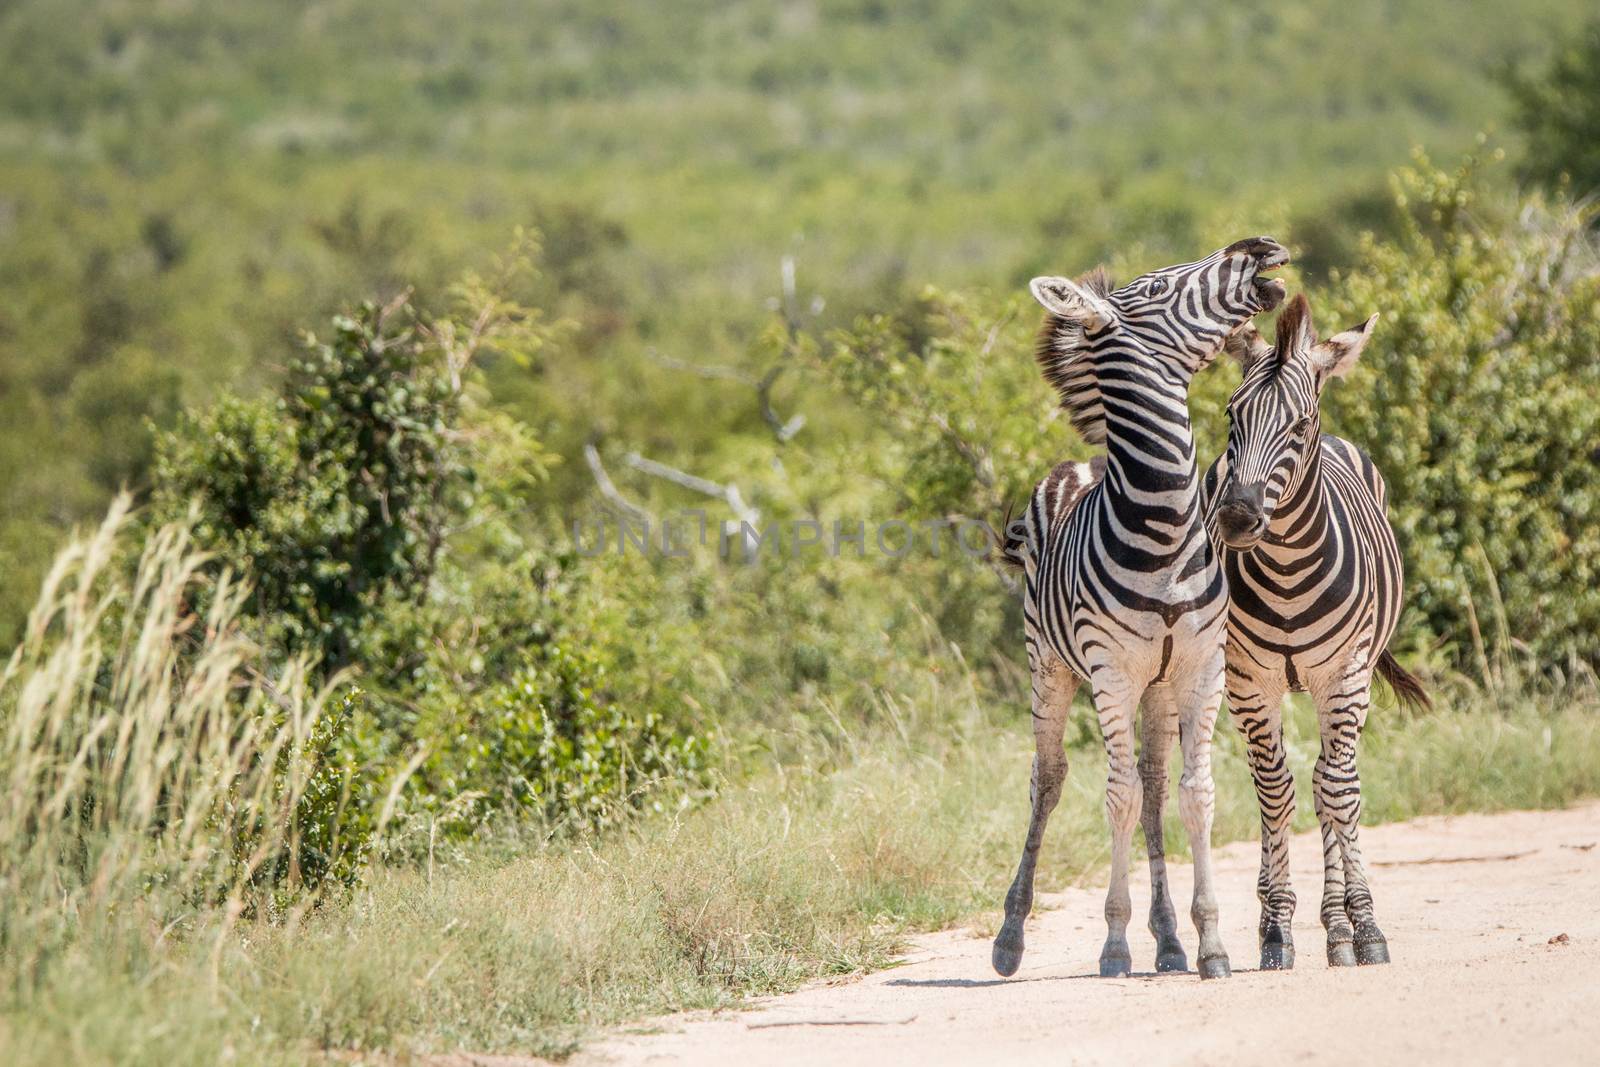 Two playing Zebras in the Kruger National Park, South Africa.